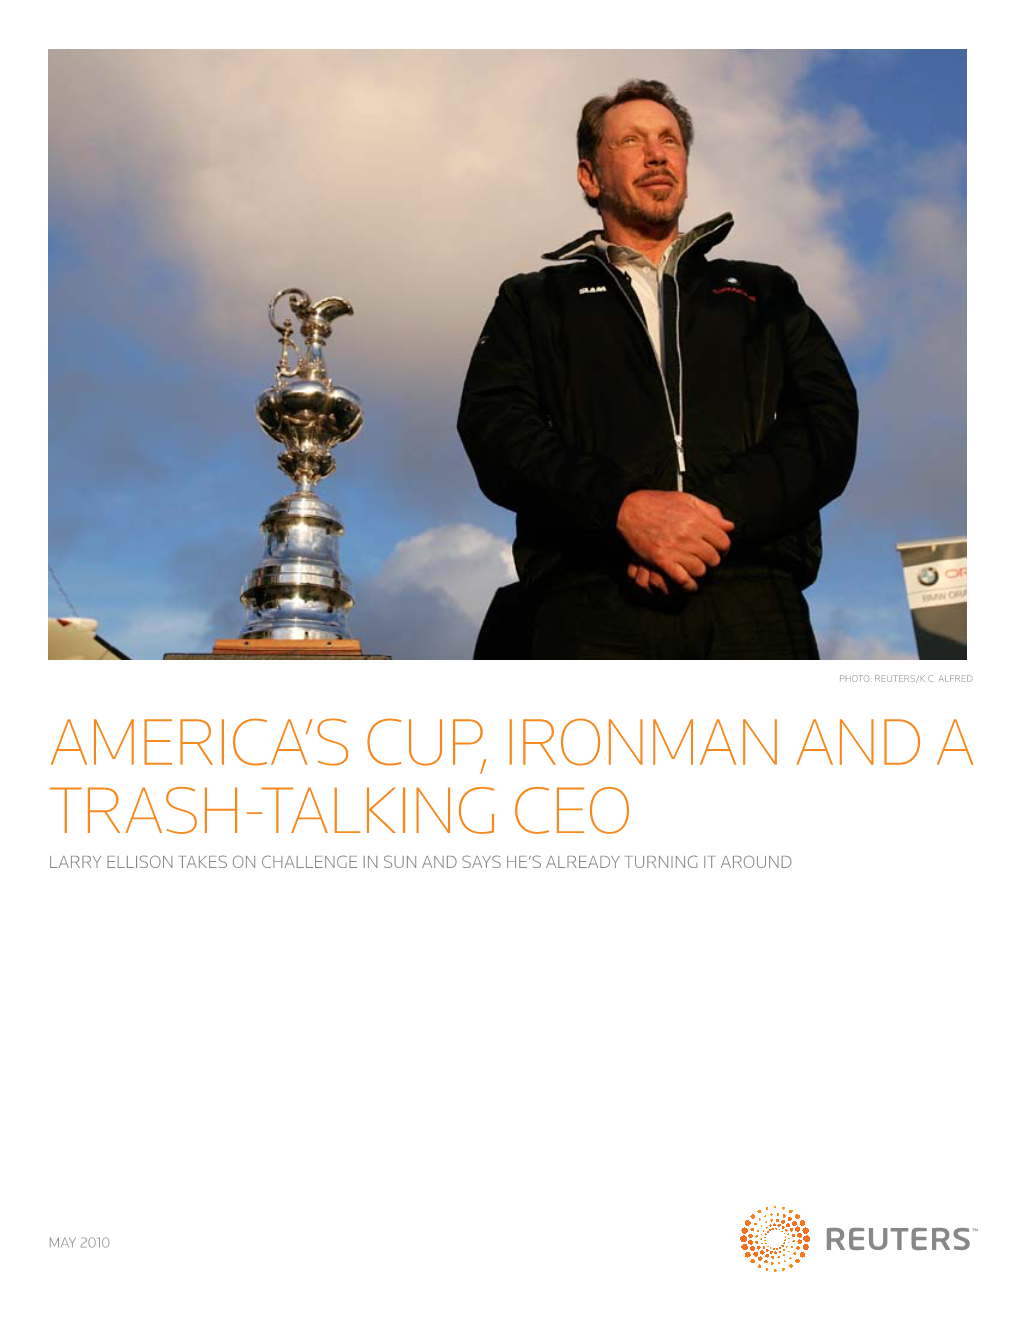 America's Cup, Ironman and a Trash-Talking